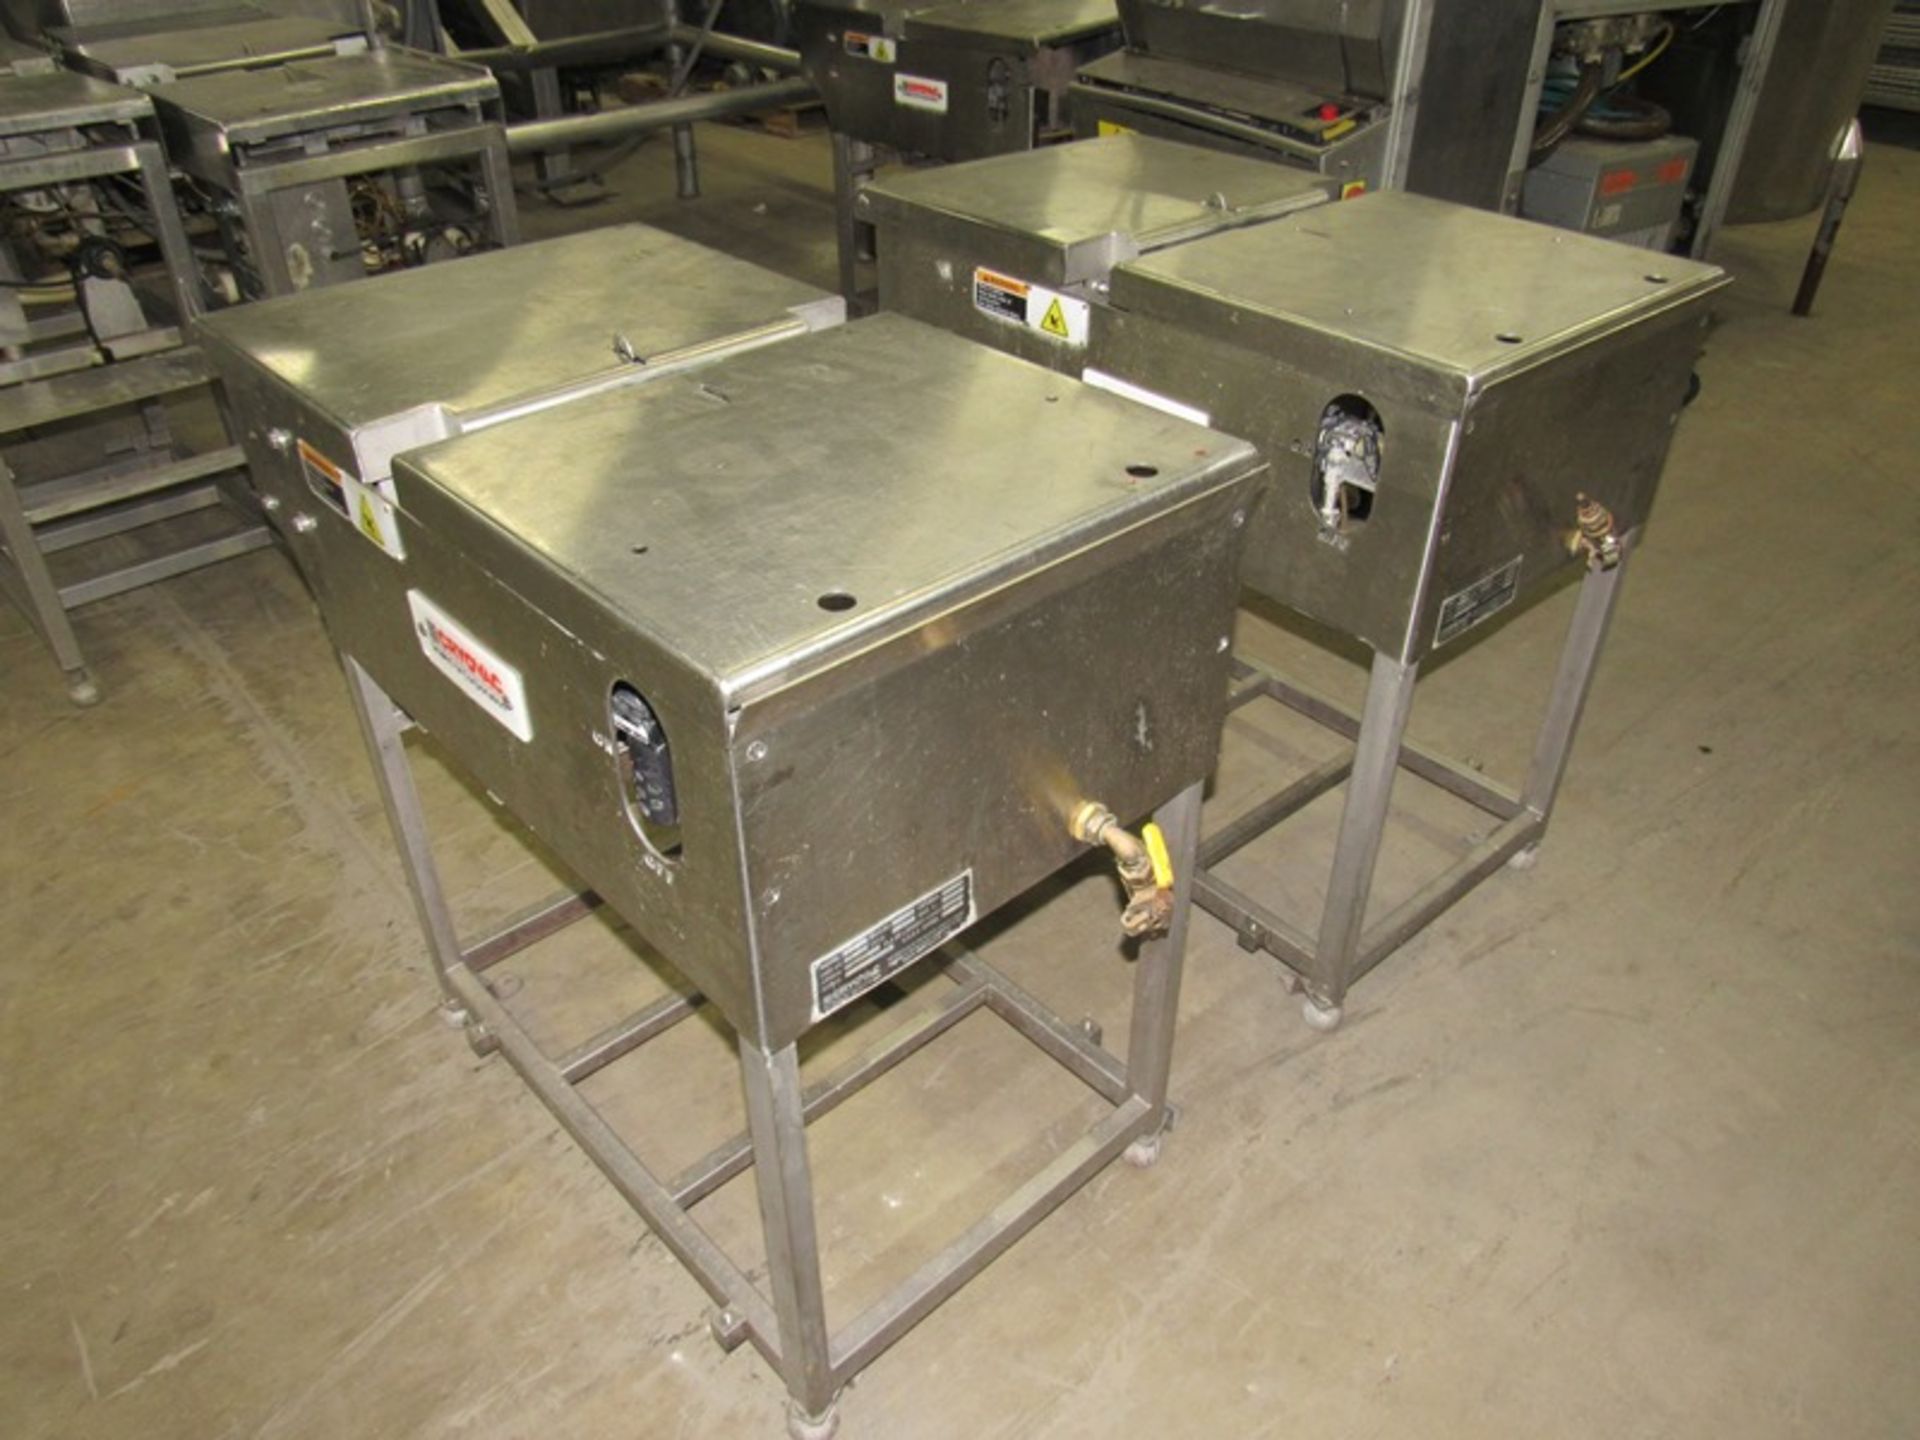 Lot of (2) Cryovac Mdl. 8189 Taped Bag Loaders, Ser. #020113314003 & 020113314004 - Image 2 of 10